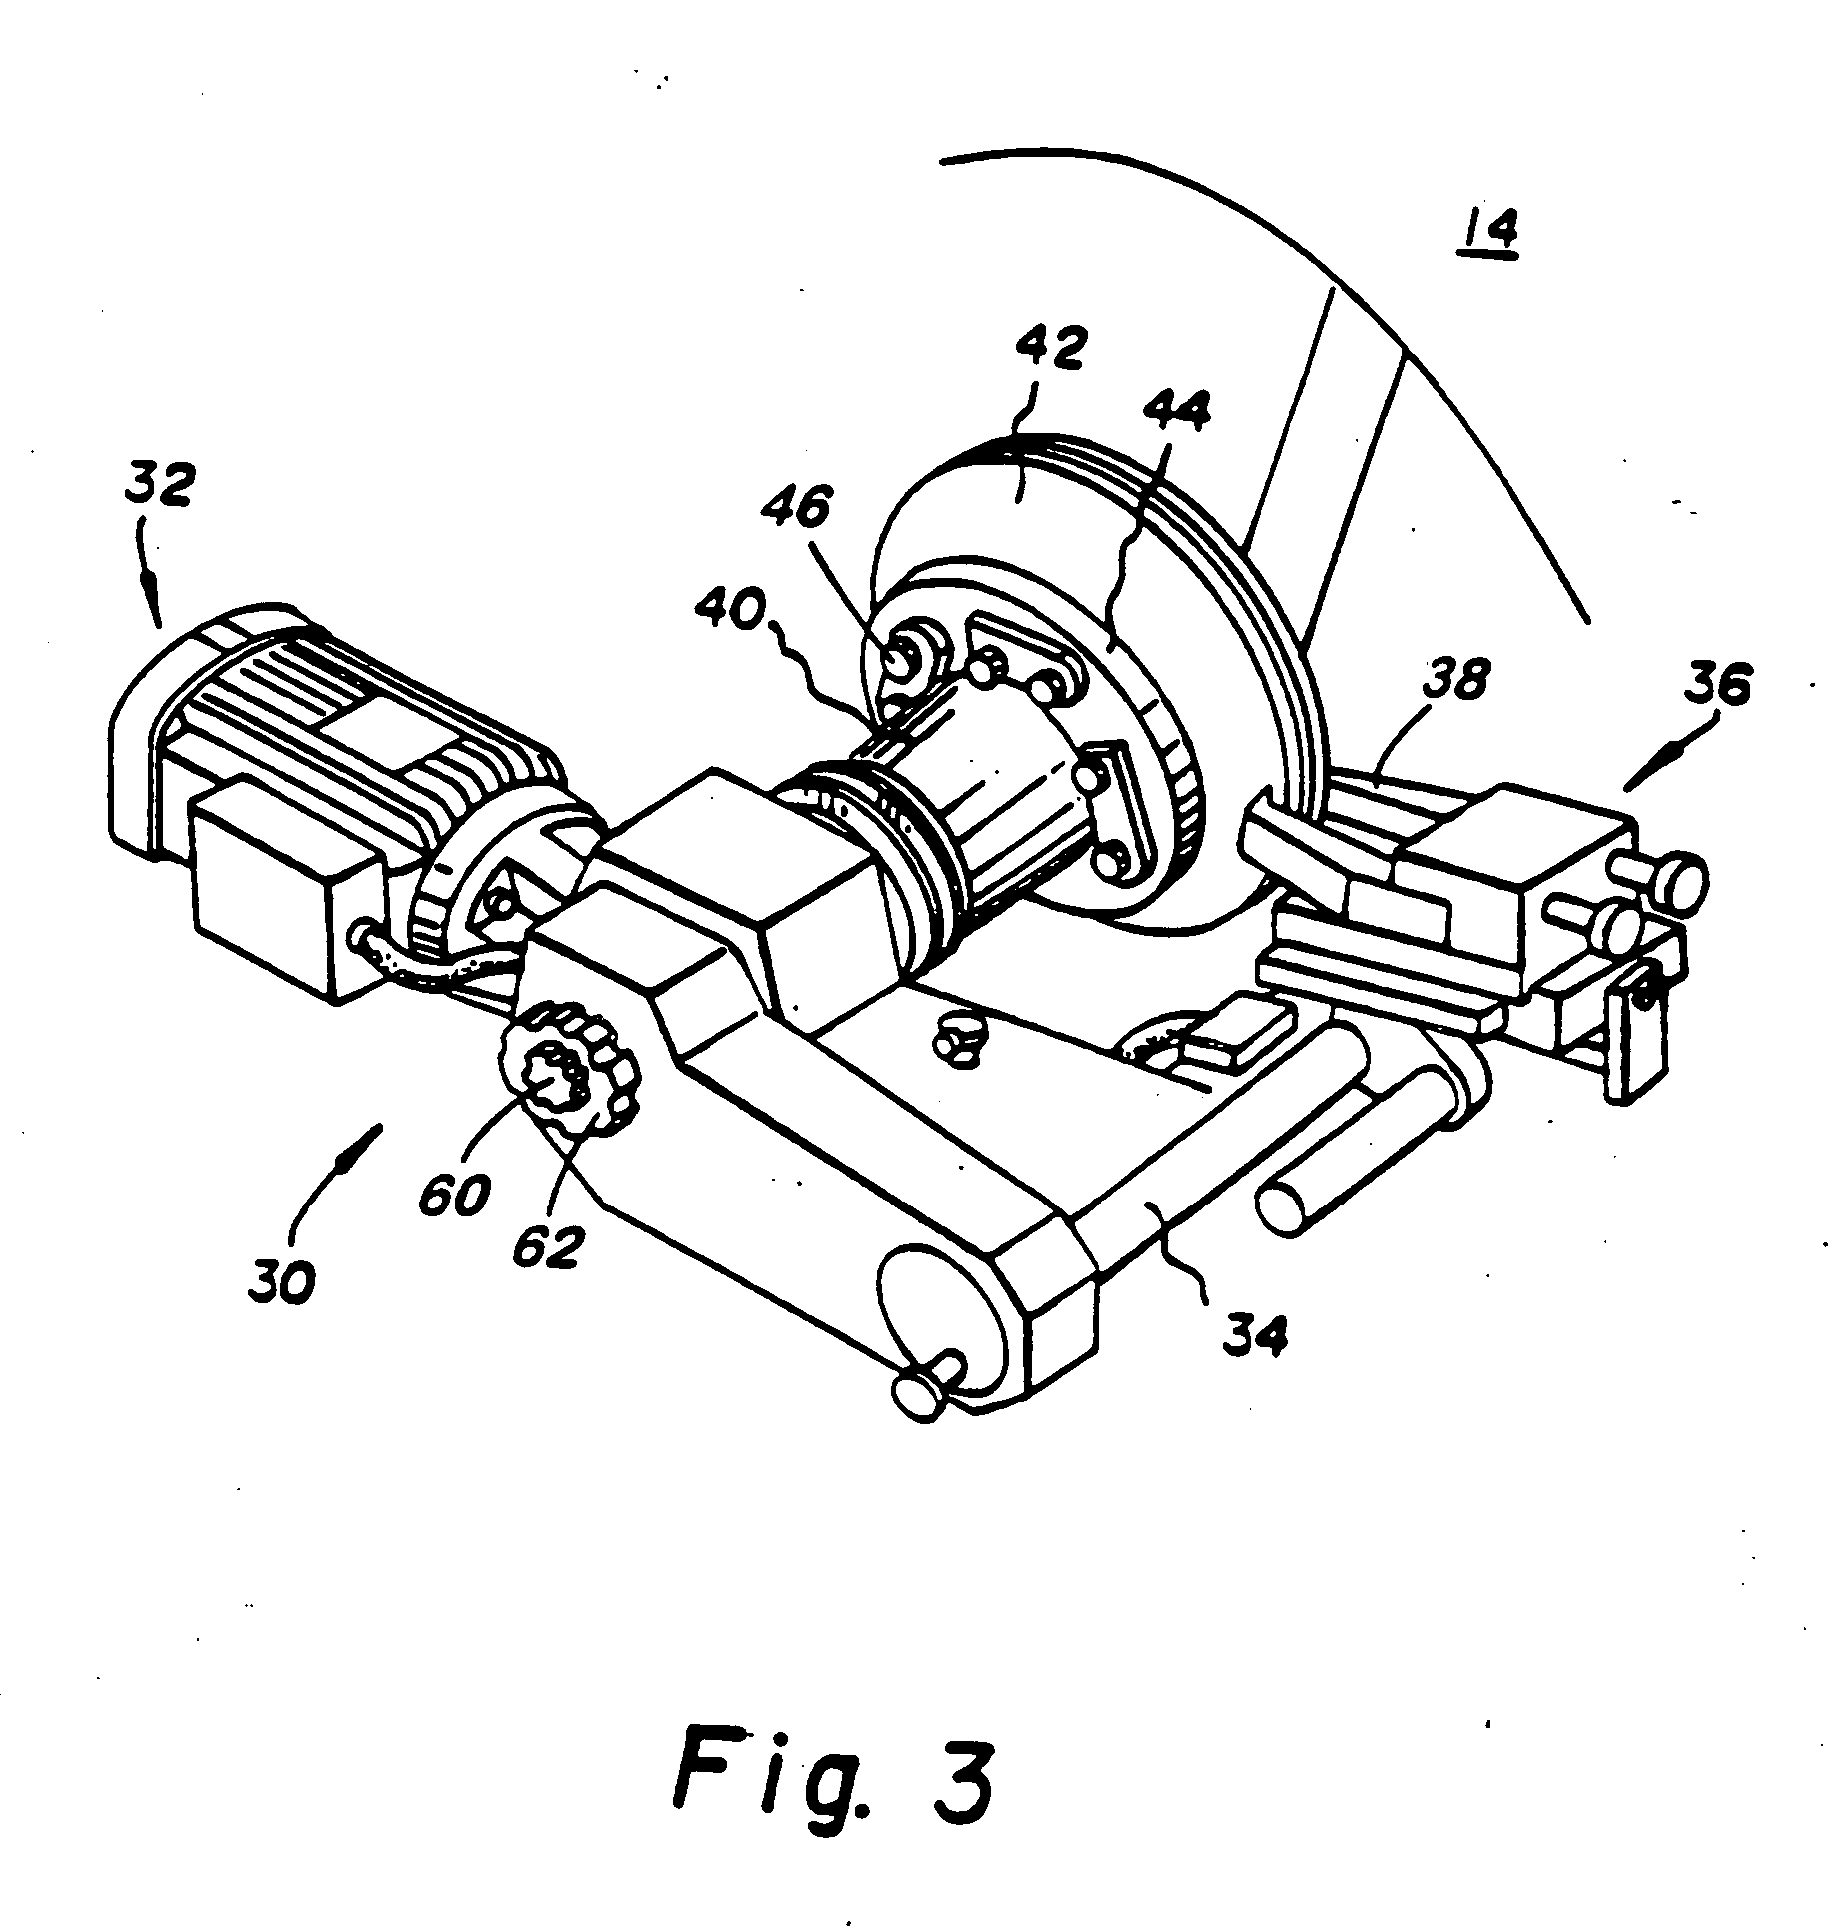 Apparatus and method for automatically compensating for lateral runout